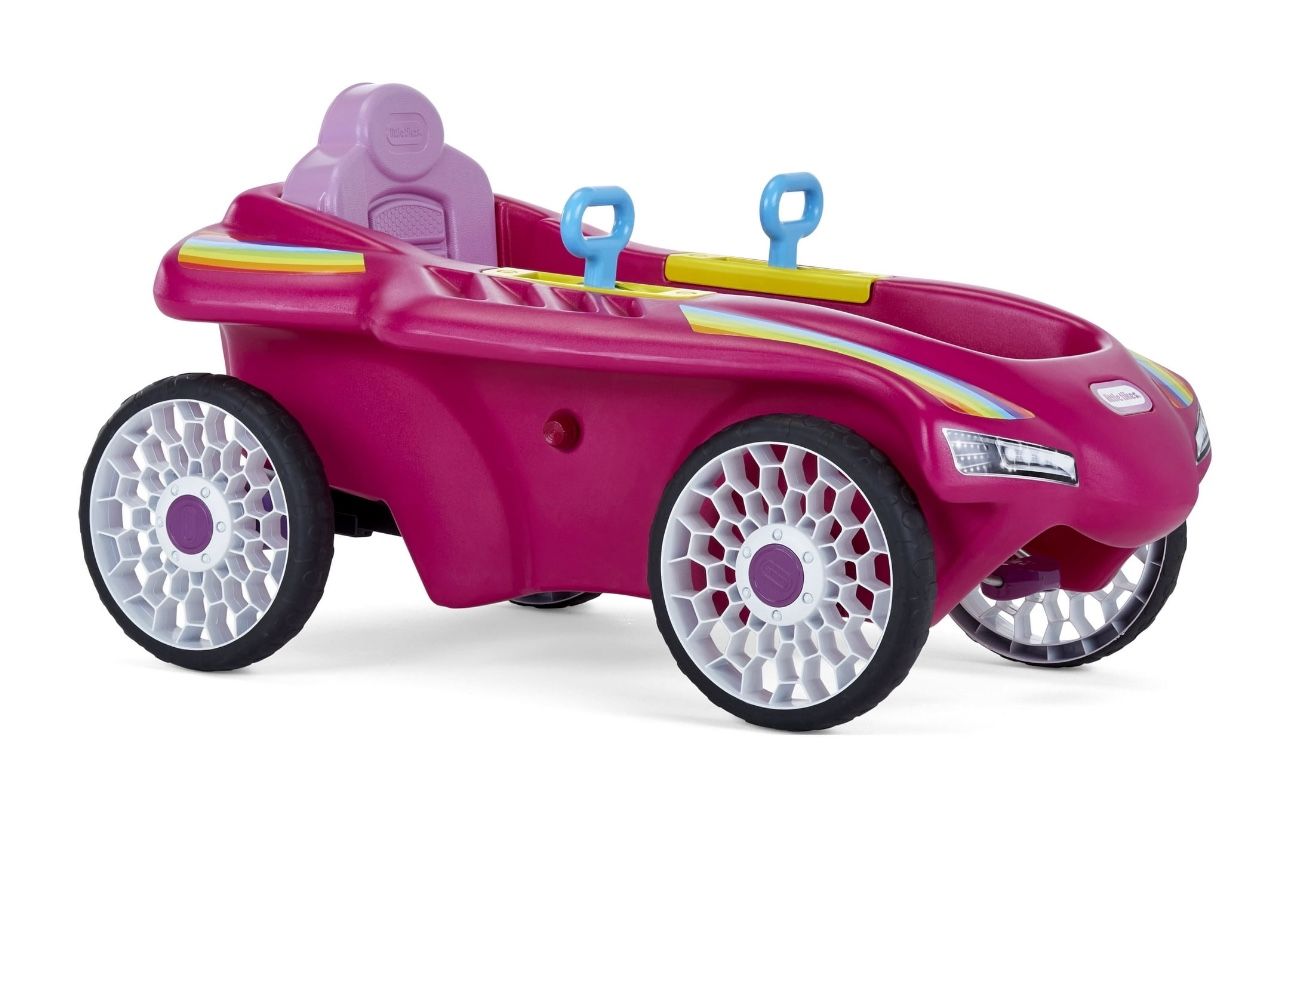 Little Tikes Jett Car Racer Ride-on Pedal Car in Pink, Adjustable Seat Back, Dual Handle Rear Wheel Steering, Kids Boys Girls Ages 3 to 7 Years